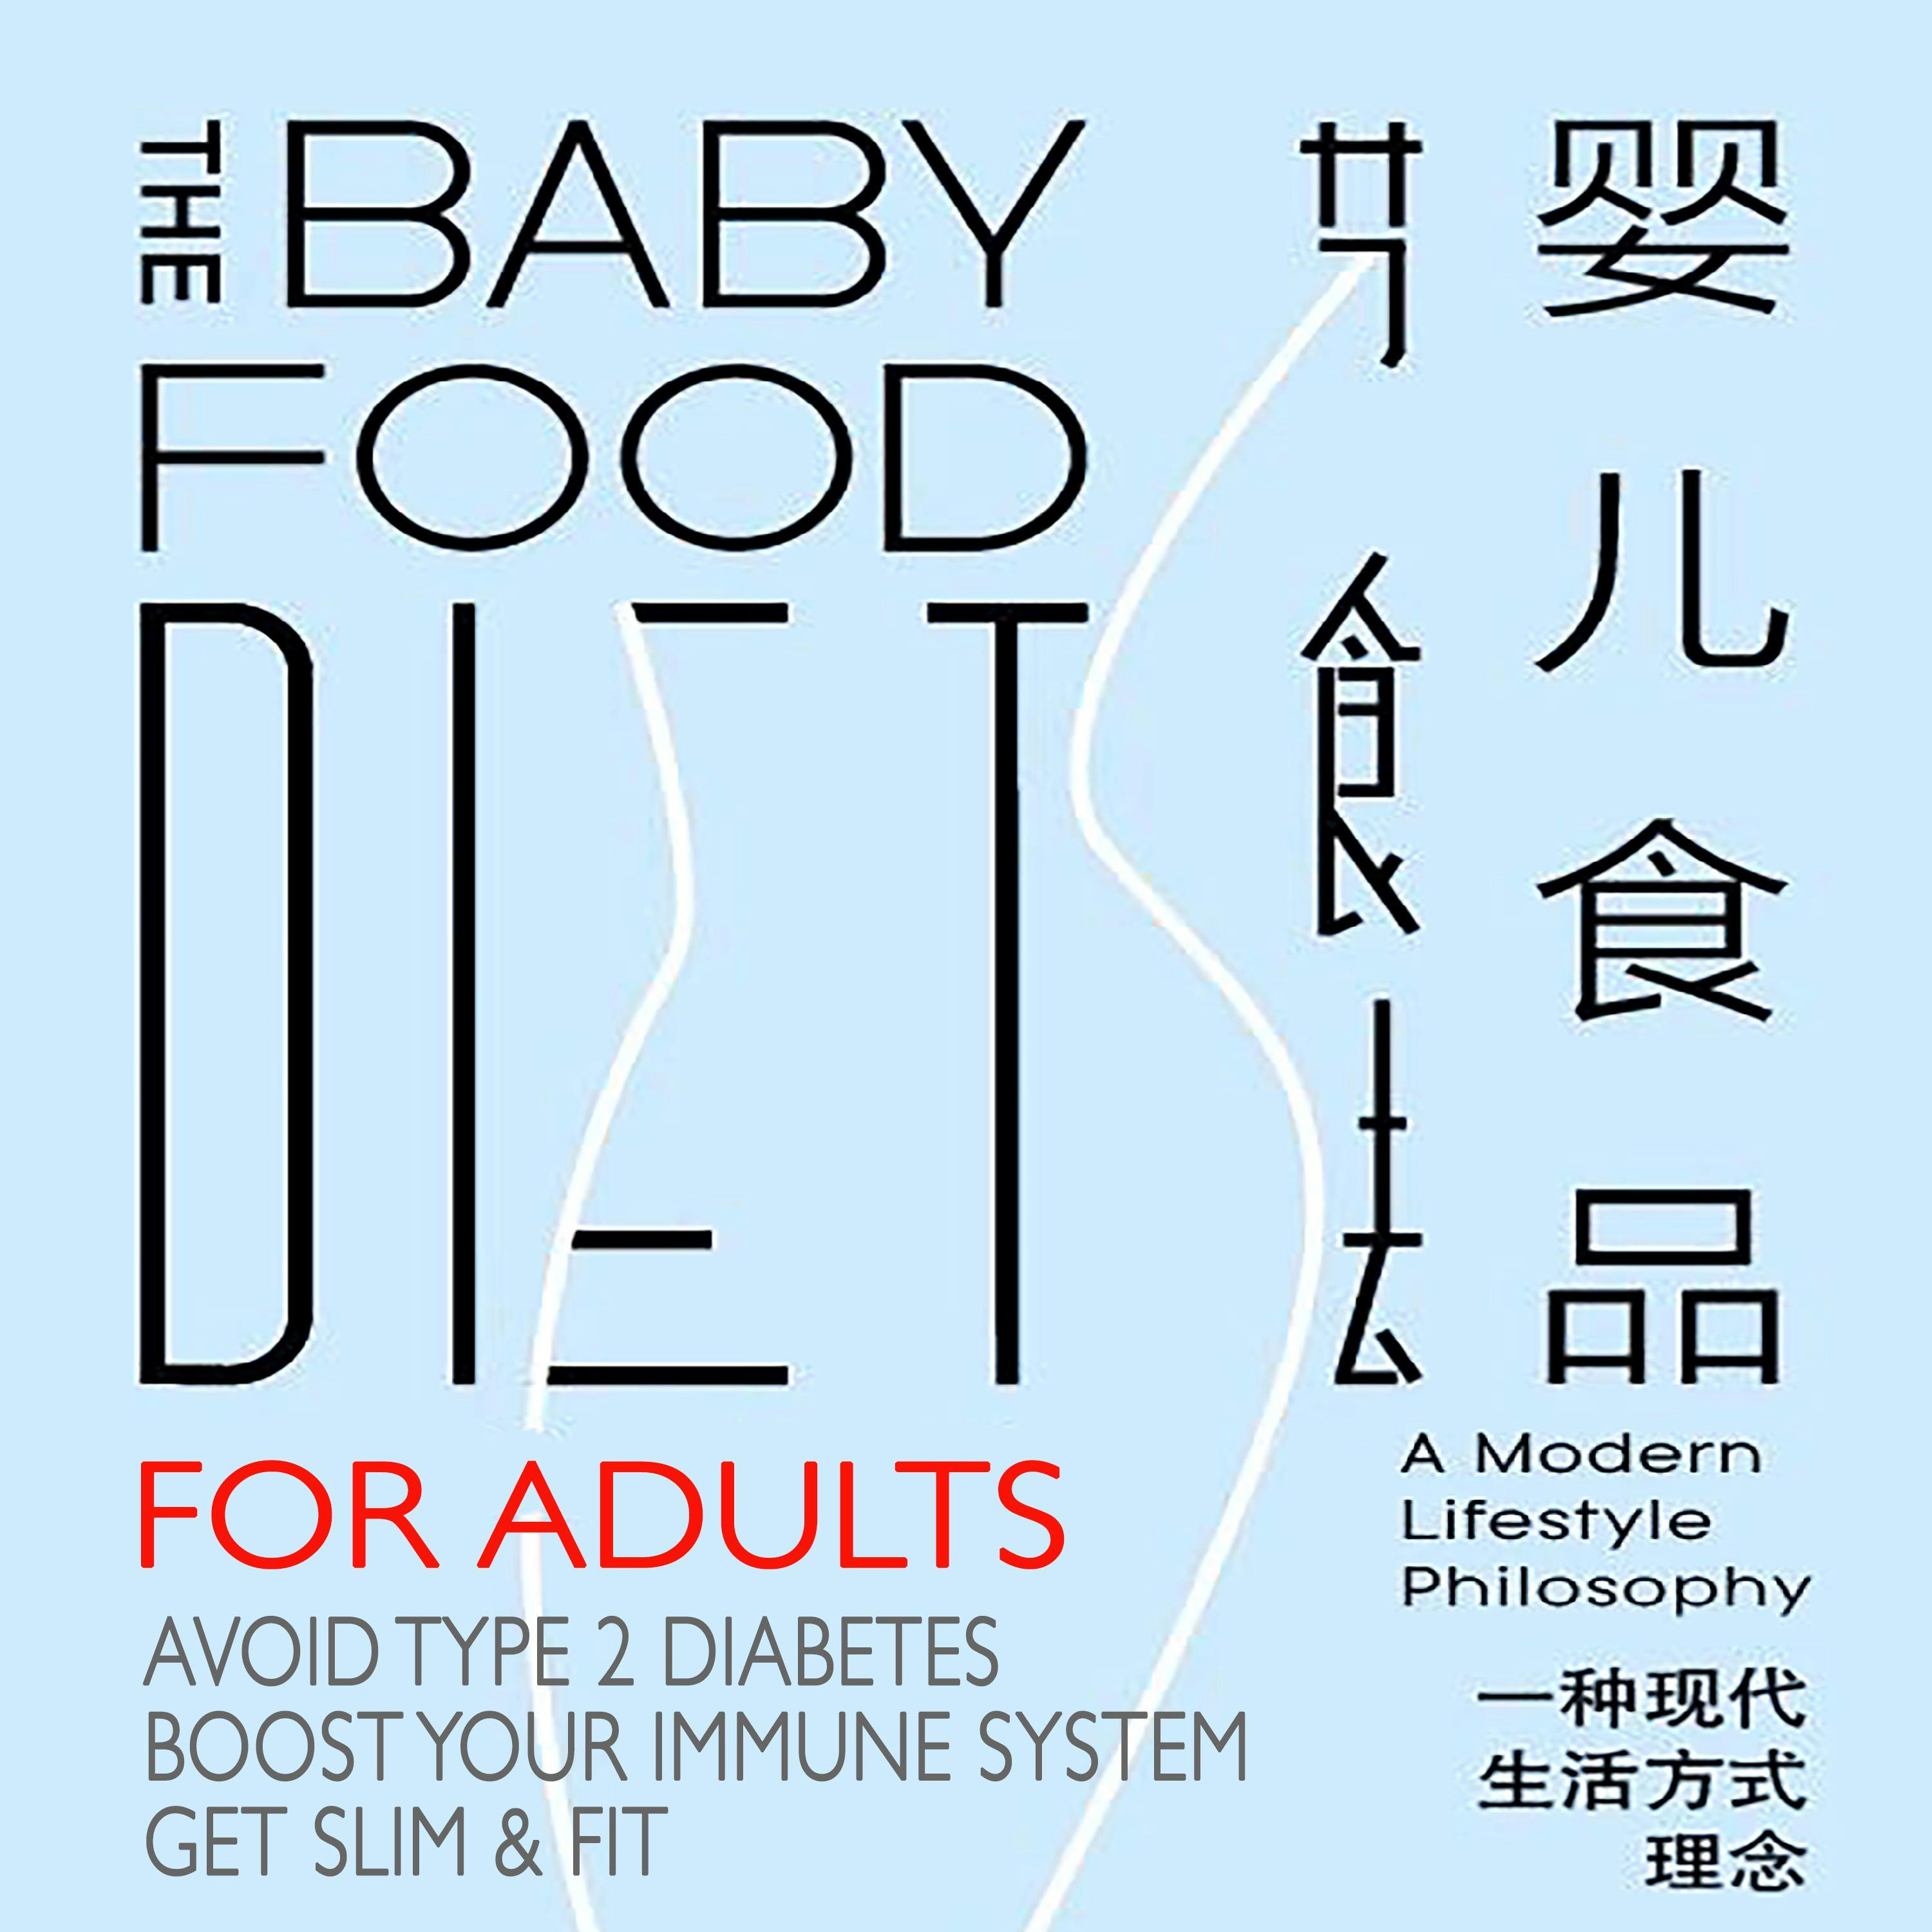 The Baby Food Diet - For Adults: Avoid Type 2 Diabetes, Boost Immune System, Get Slim and Fit - BFD USA Co